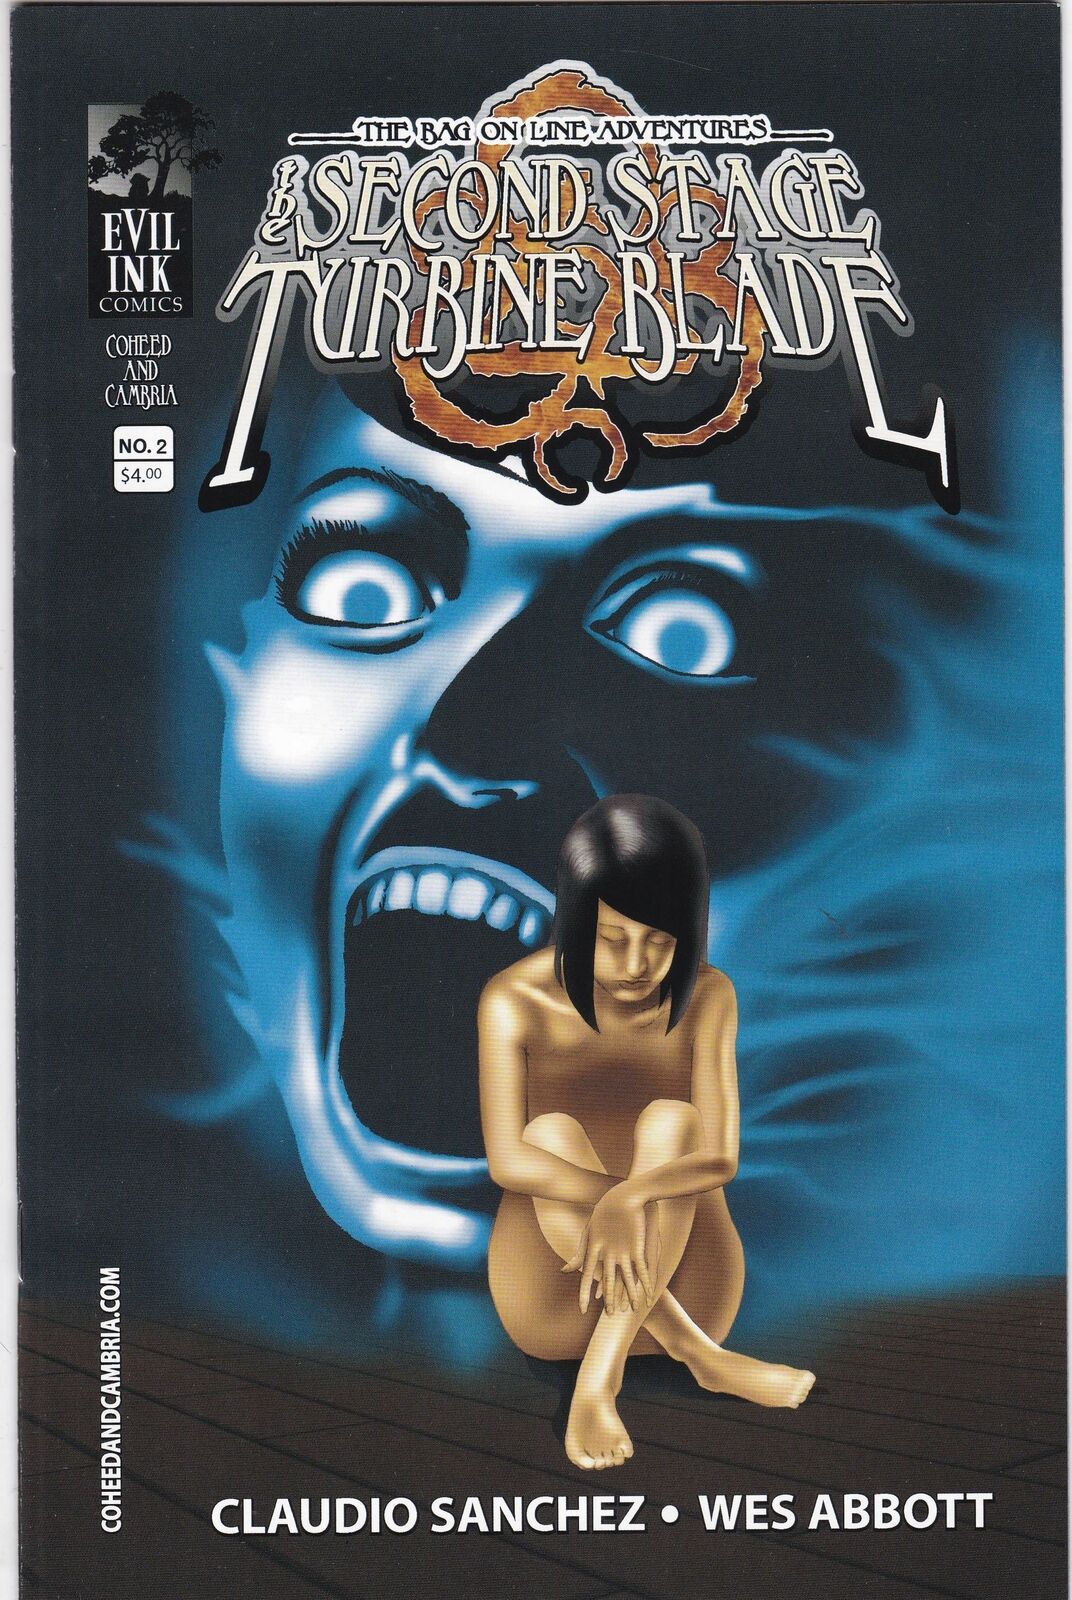 THE SECOND STAGE TURBINE BLADE #2 NM- ARMORY WARS EVIL INK COMICS SCARCE